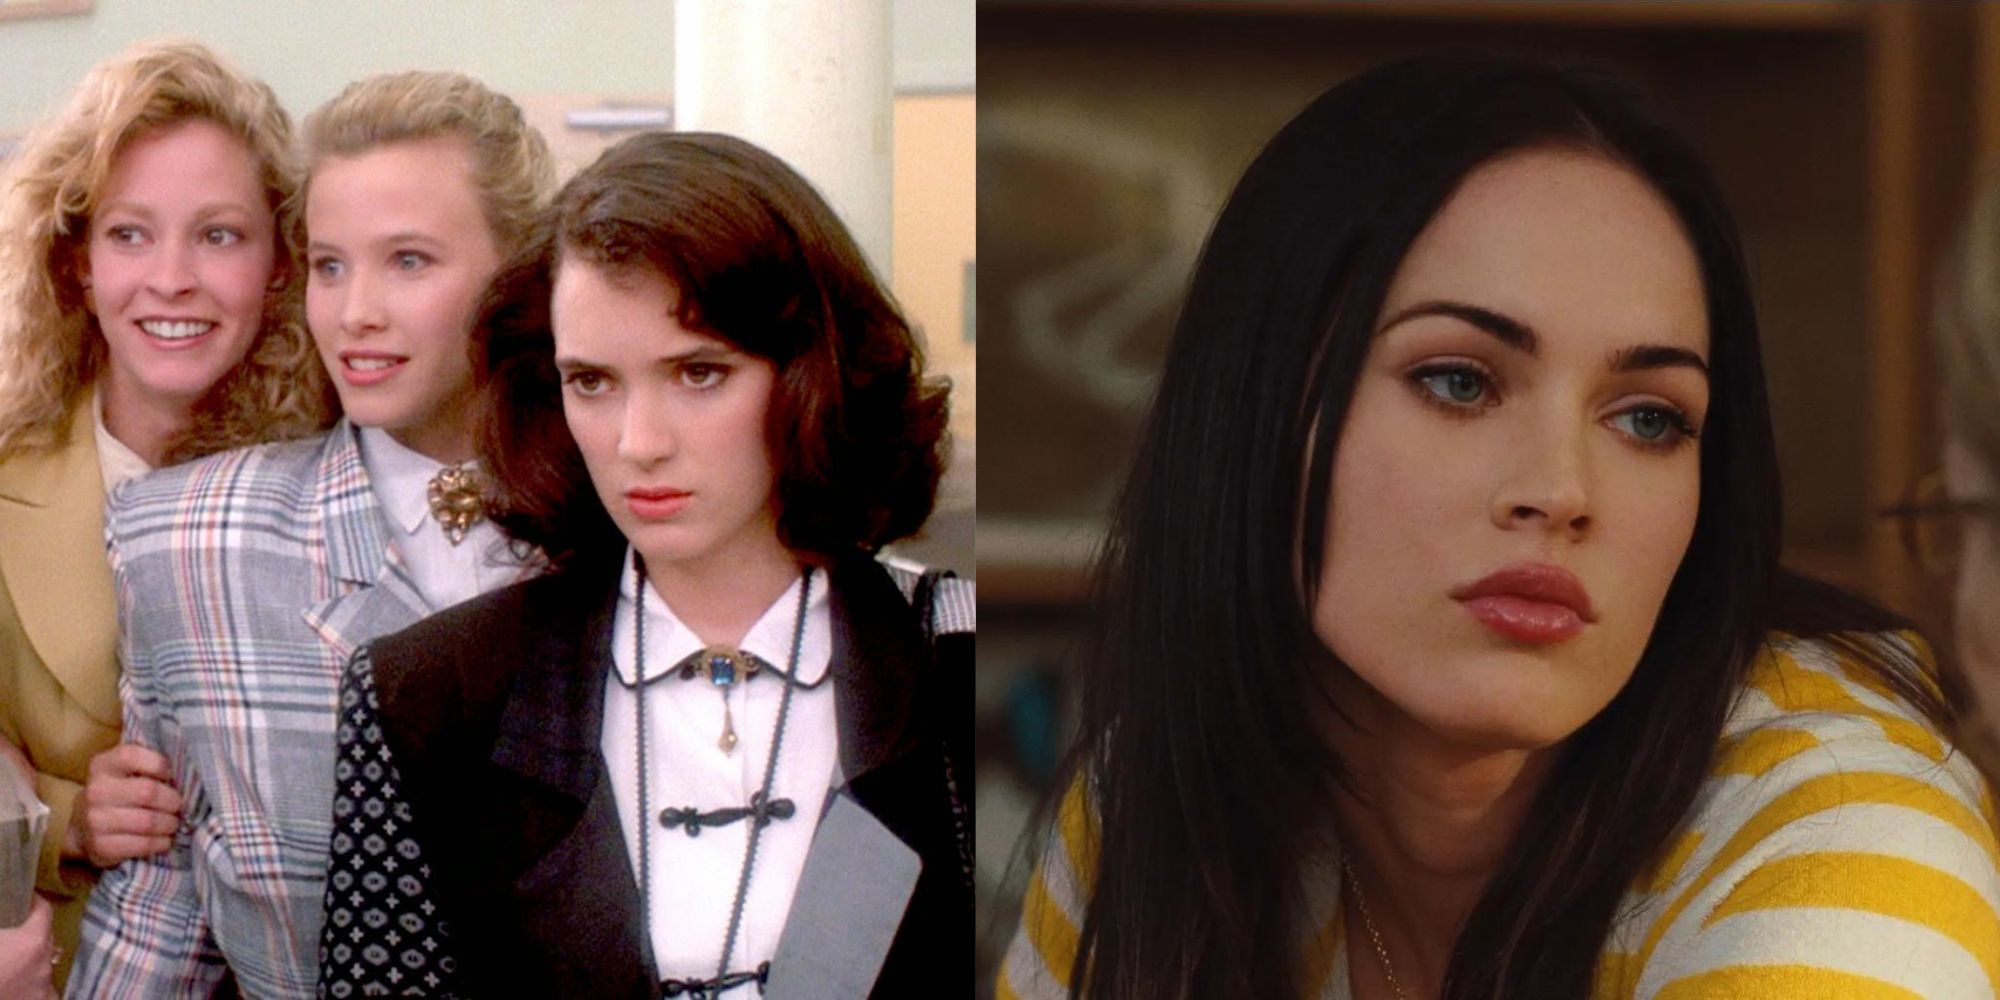 Winona Ryder and Megan Fox in Heathers and Jennifer's Body